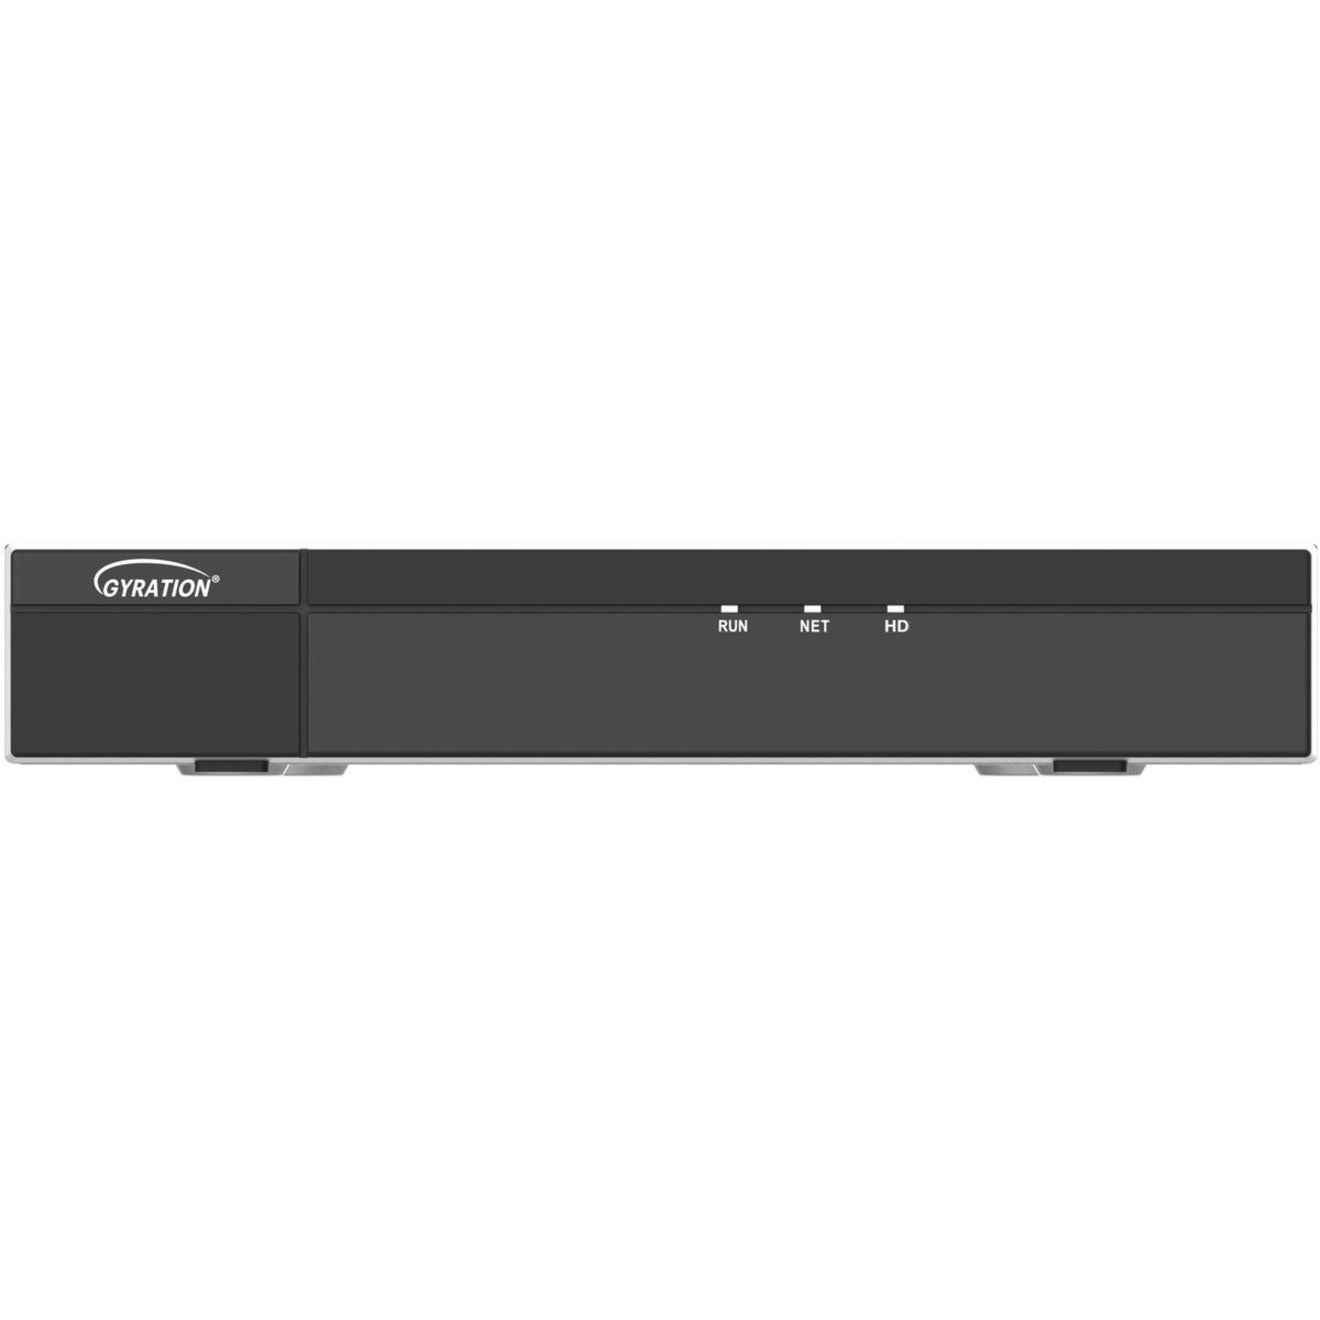 Gyration CYBERVIEW N4-4TB 4-Channel Network Video Recorder With PoE, 4K Ultra HD, 4TB HDD, 5-Year Warranty